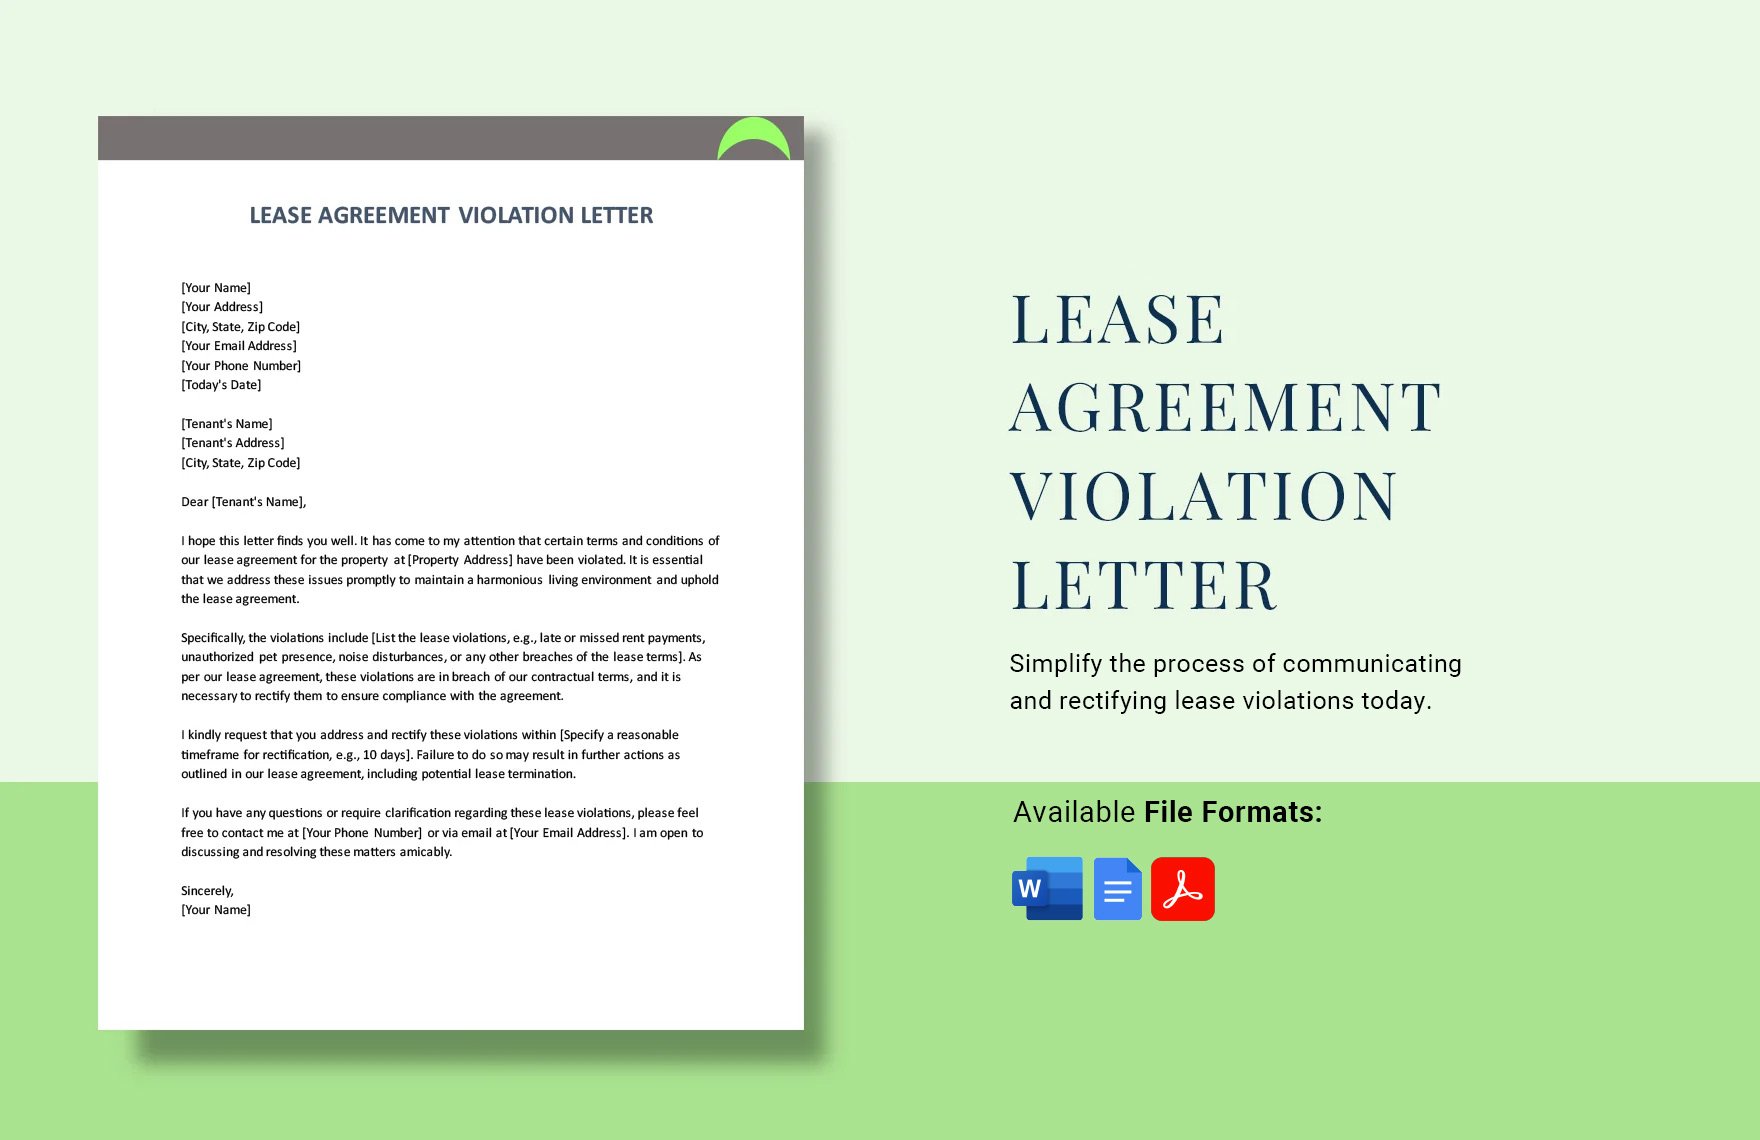 Free Lease Agreement Violation Letter in Word, Google Docs, PDF